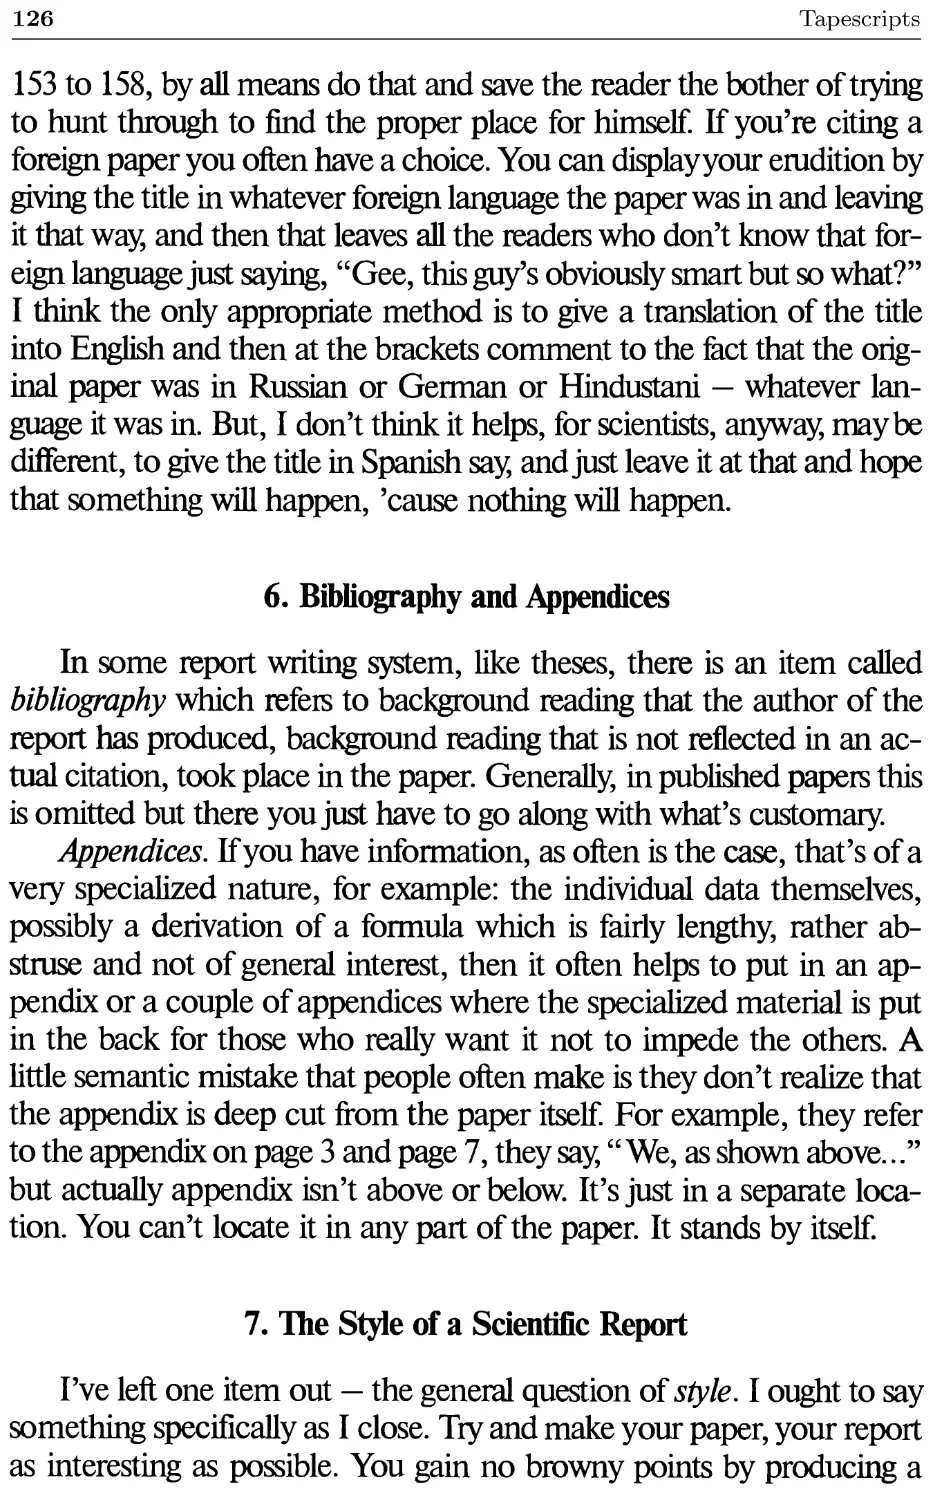 6. Bibliography and Appendices
7. The Style of a Scientific Report